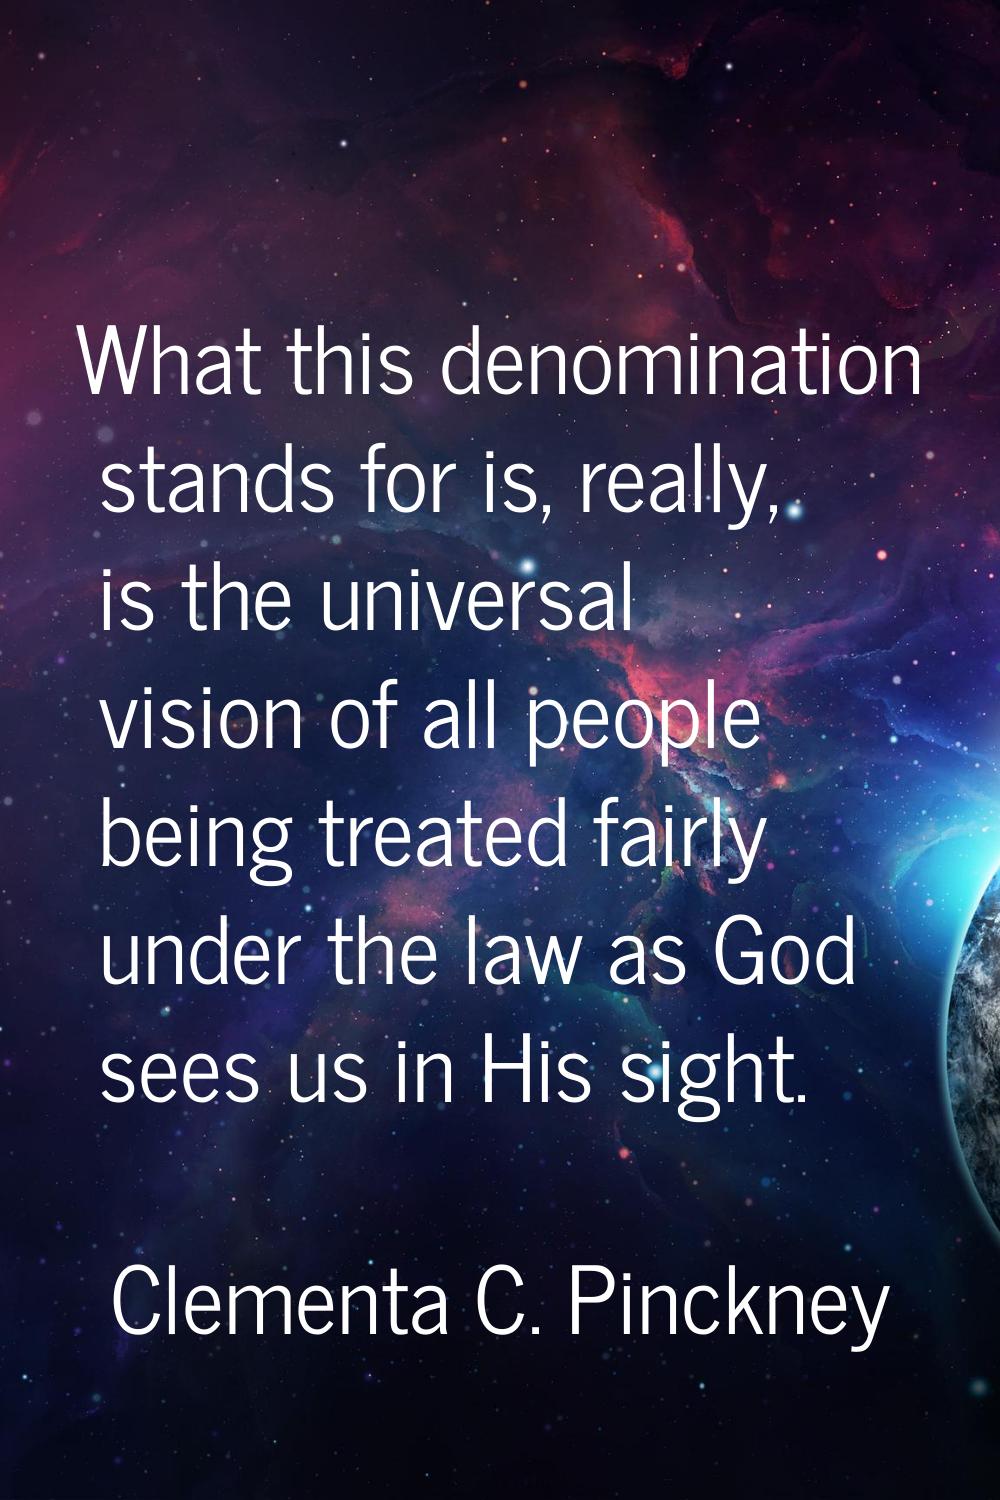 What this denomination stands for is, really, is the universal vision of all people being treated f